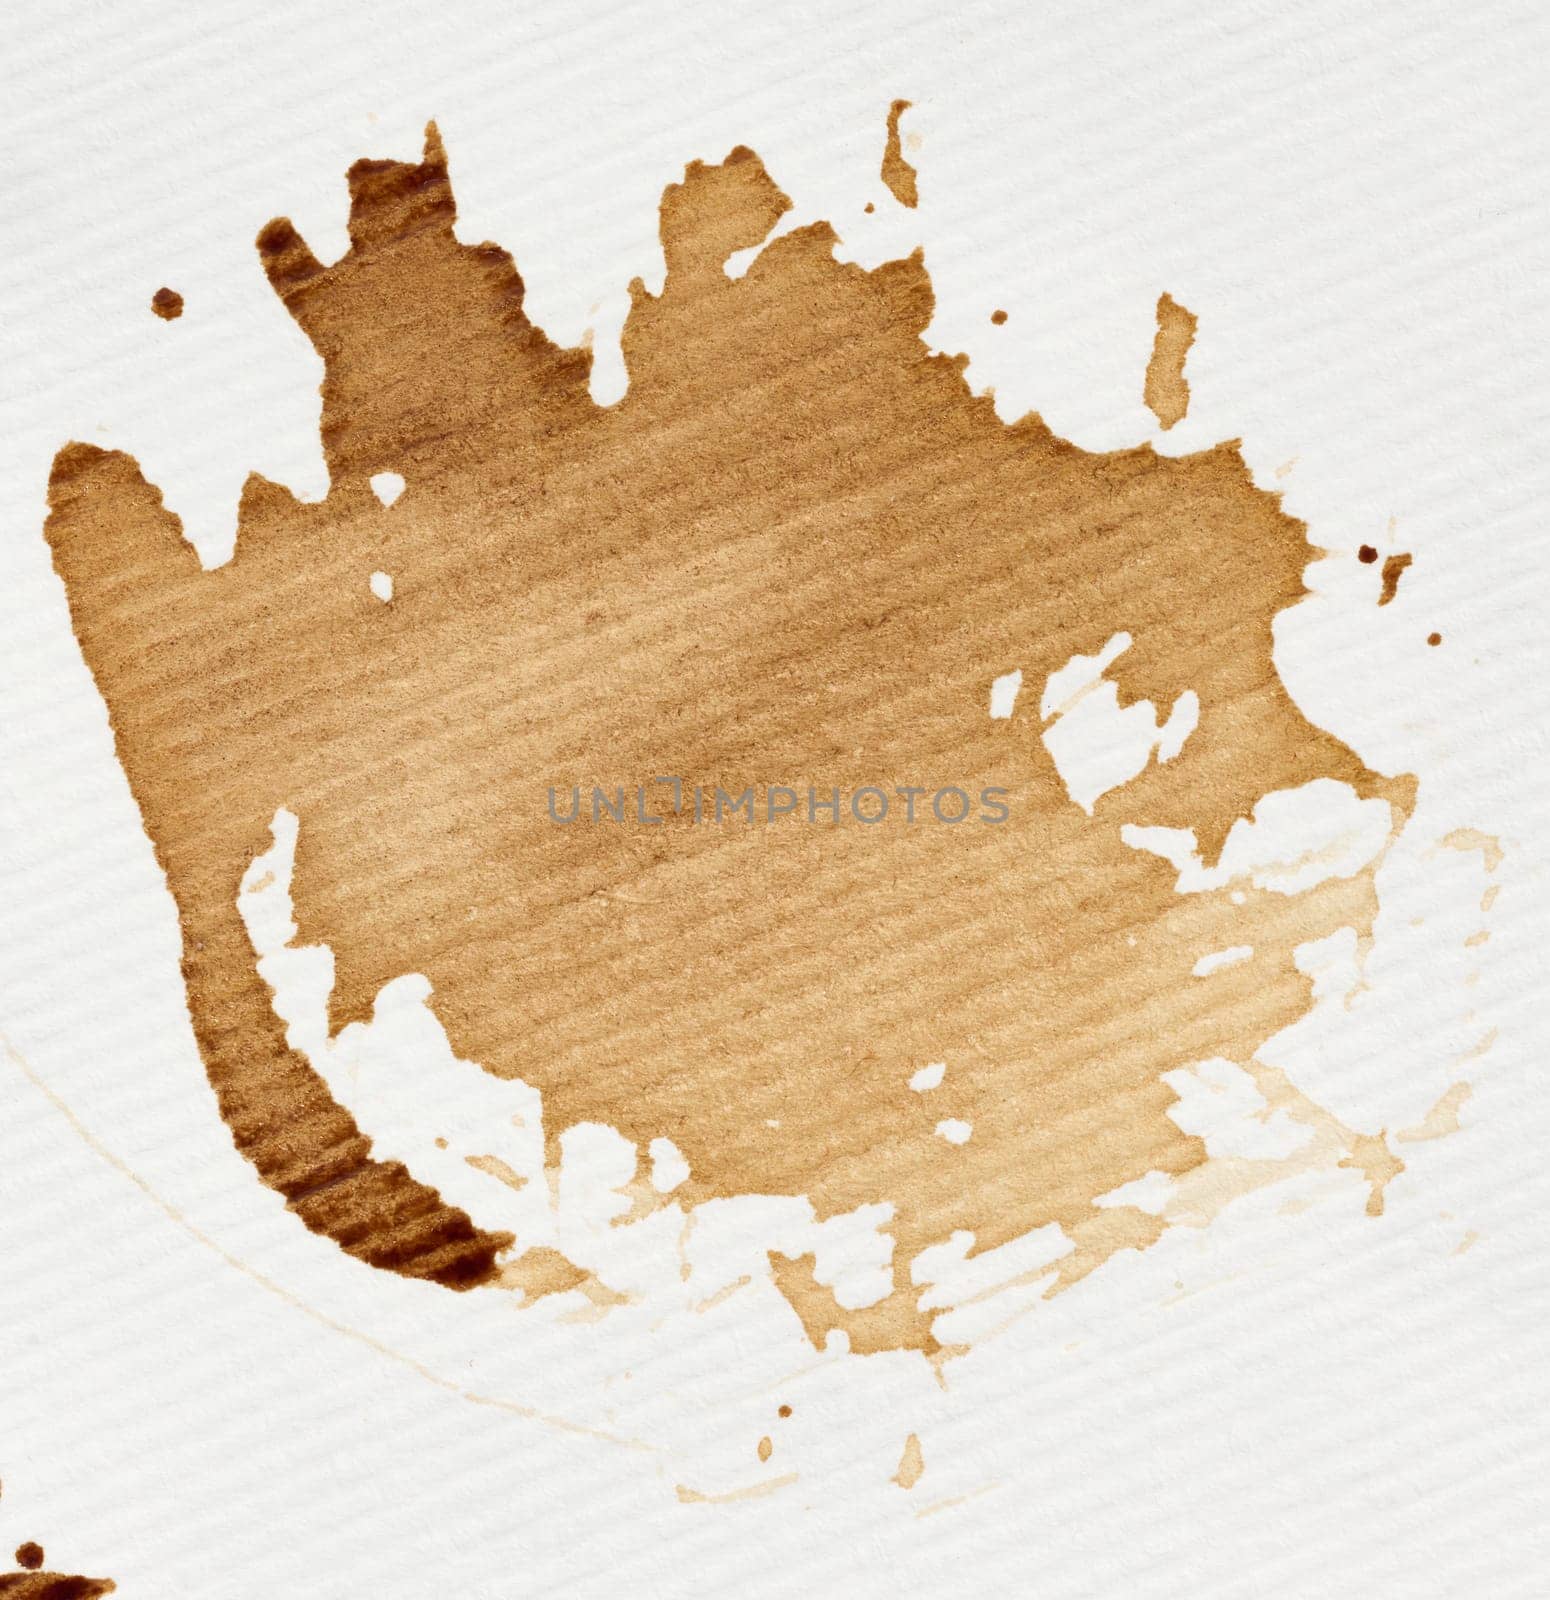 Spilled black coffee on a white background, blot